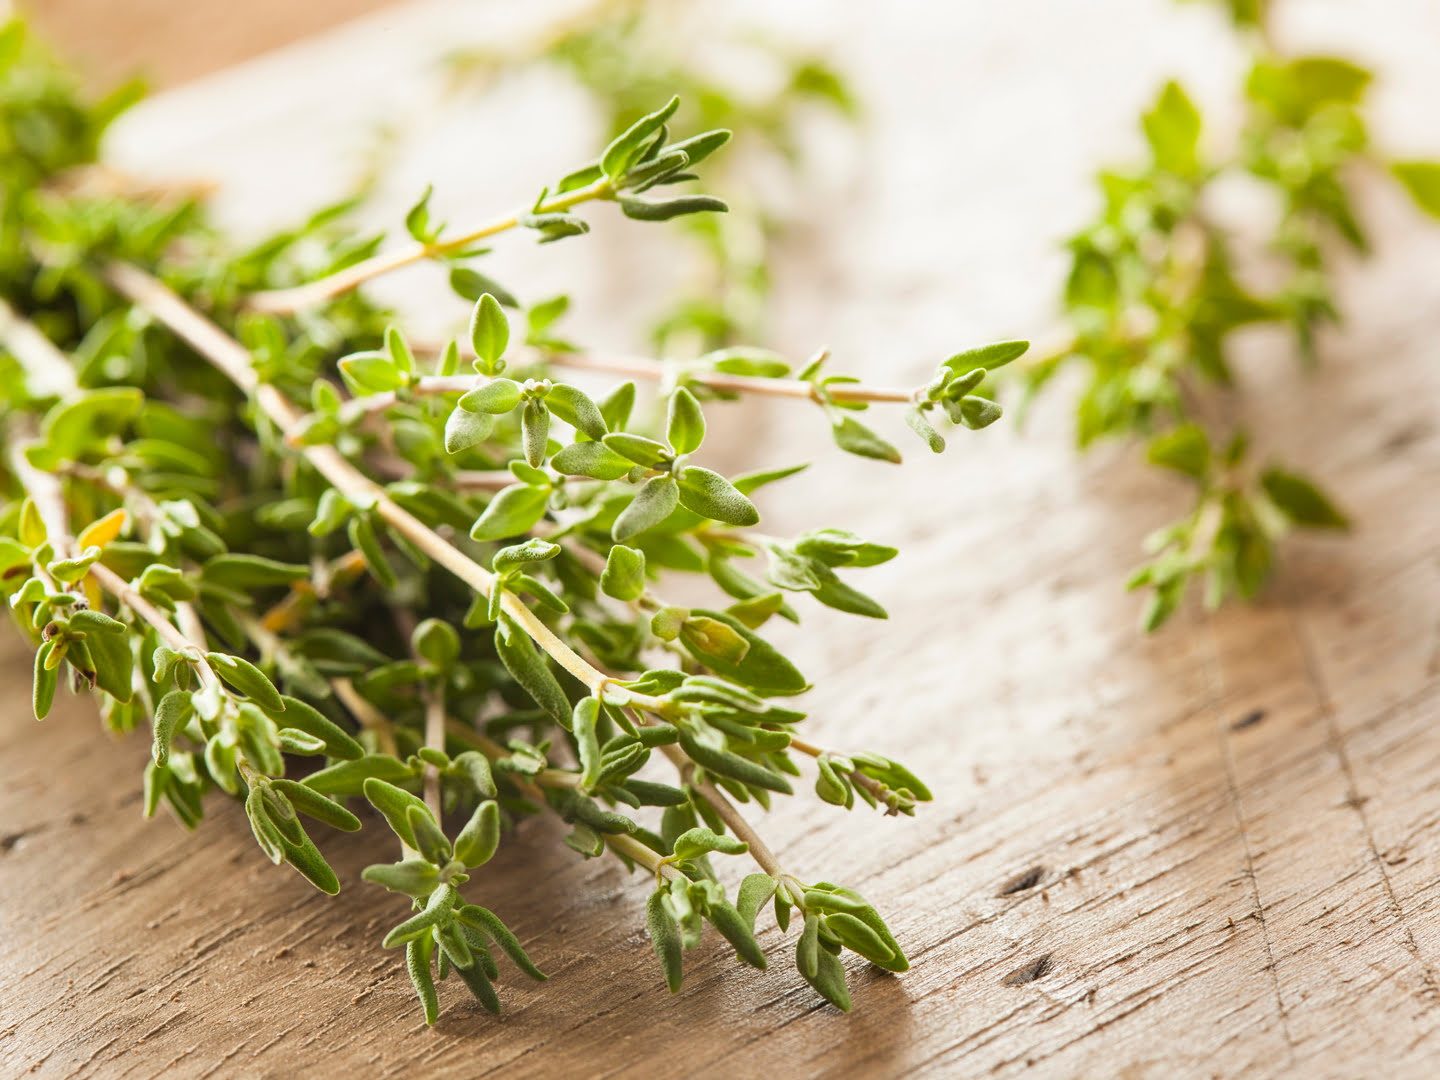 What Is Thyme Used For